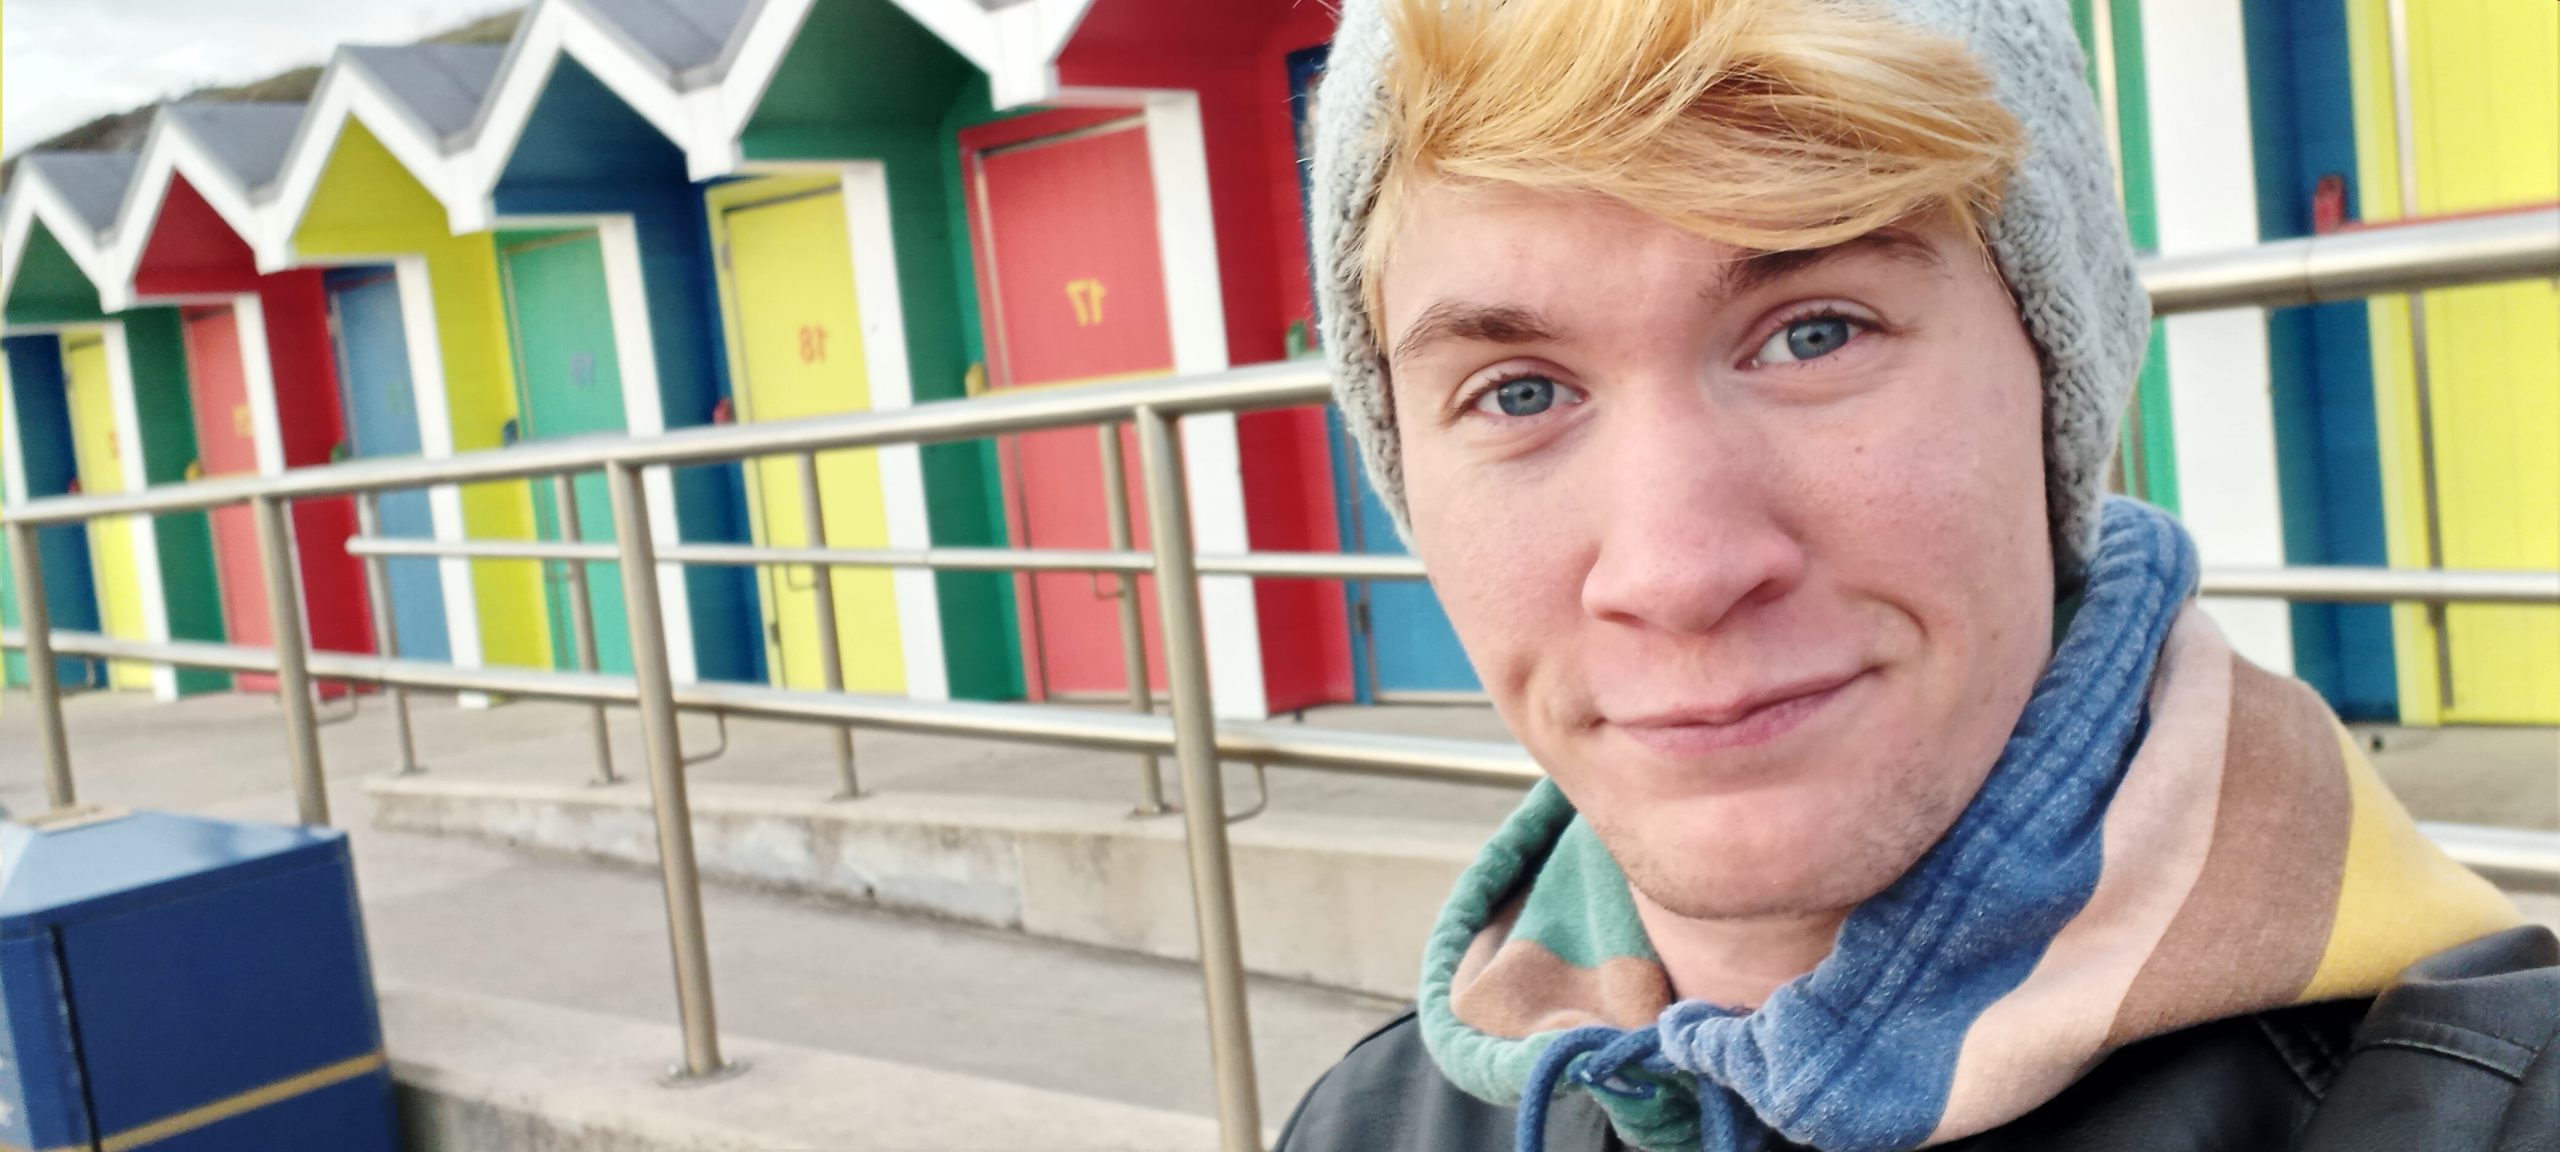 Riley, a white nonbinary person with short bleach blonde hair, smiles while standing in front of the Barry Island beach huts.